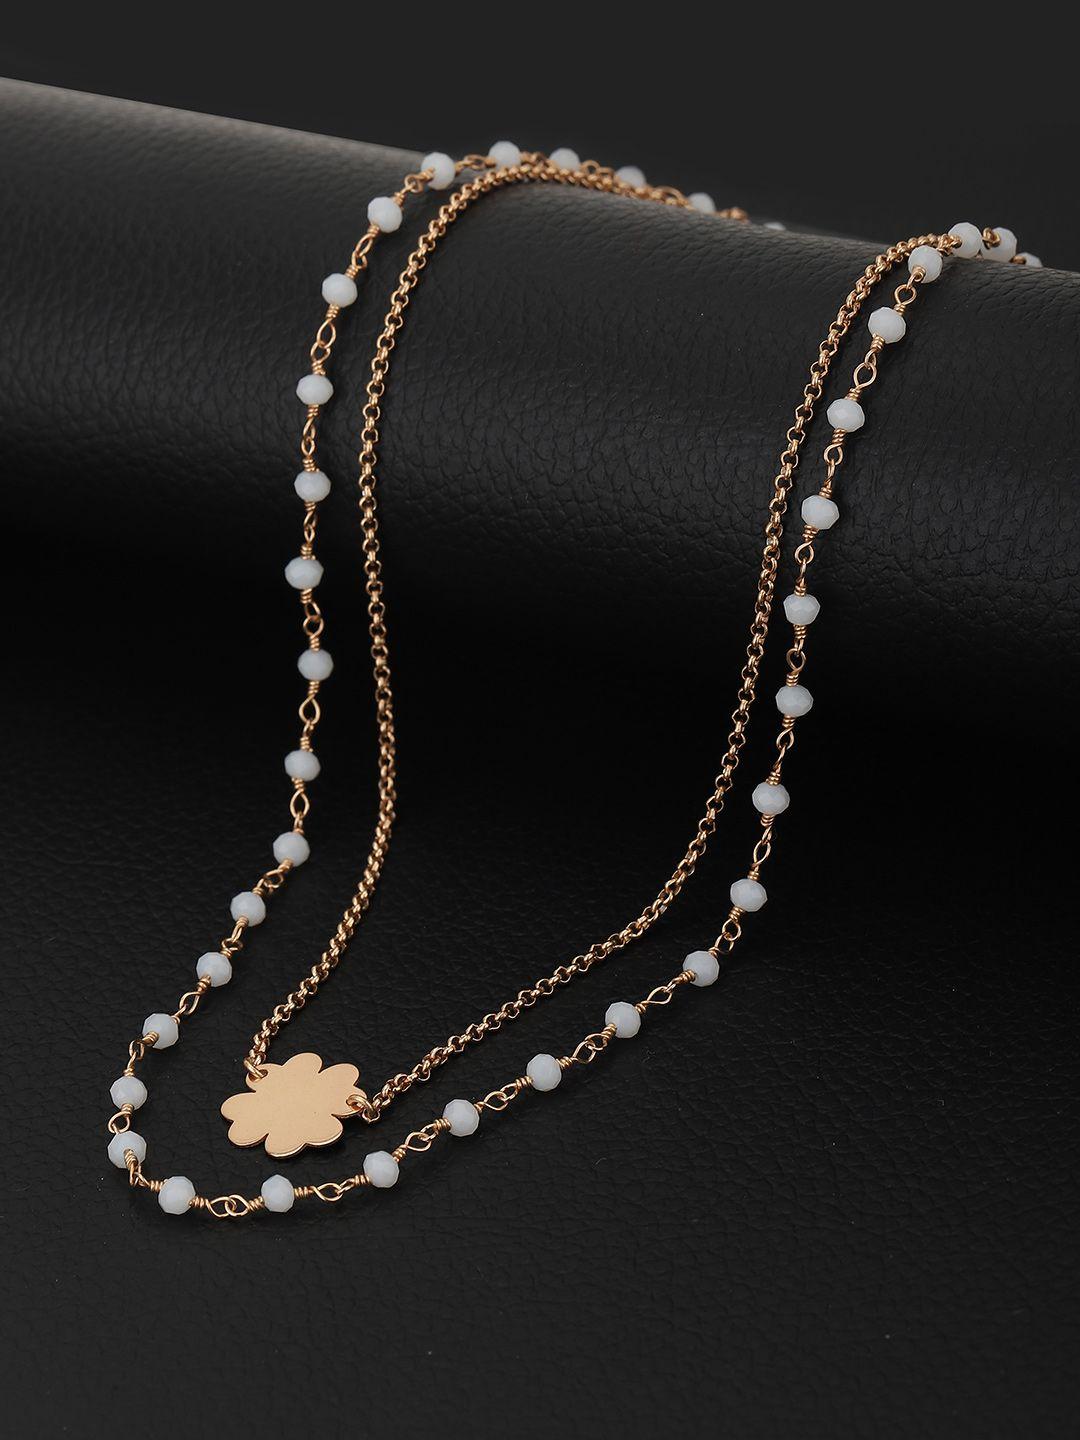 carlton-london-rose-gold-plated-&-white-brass-layered-necklace